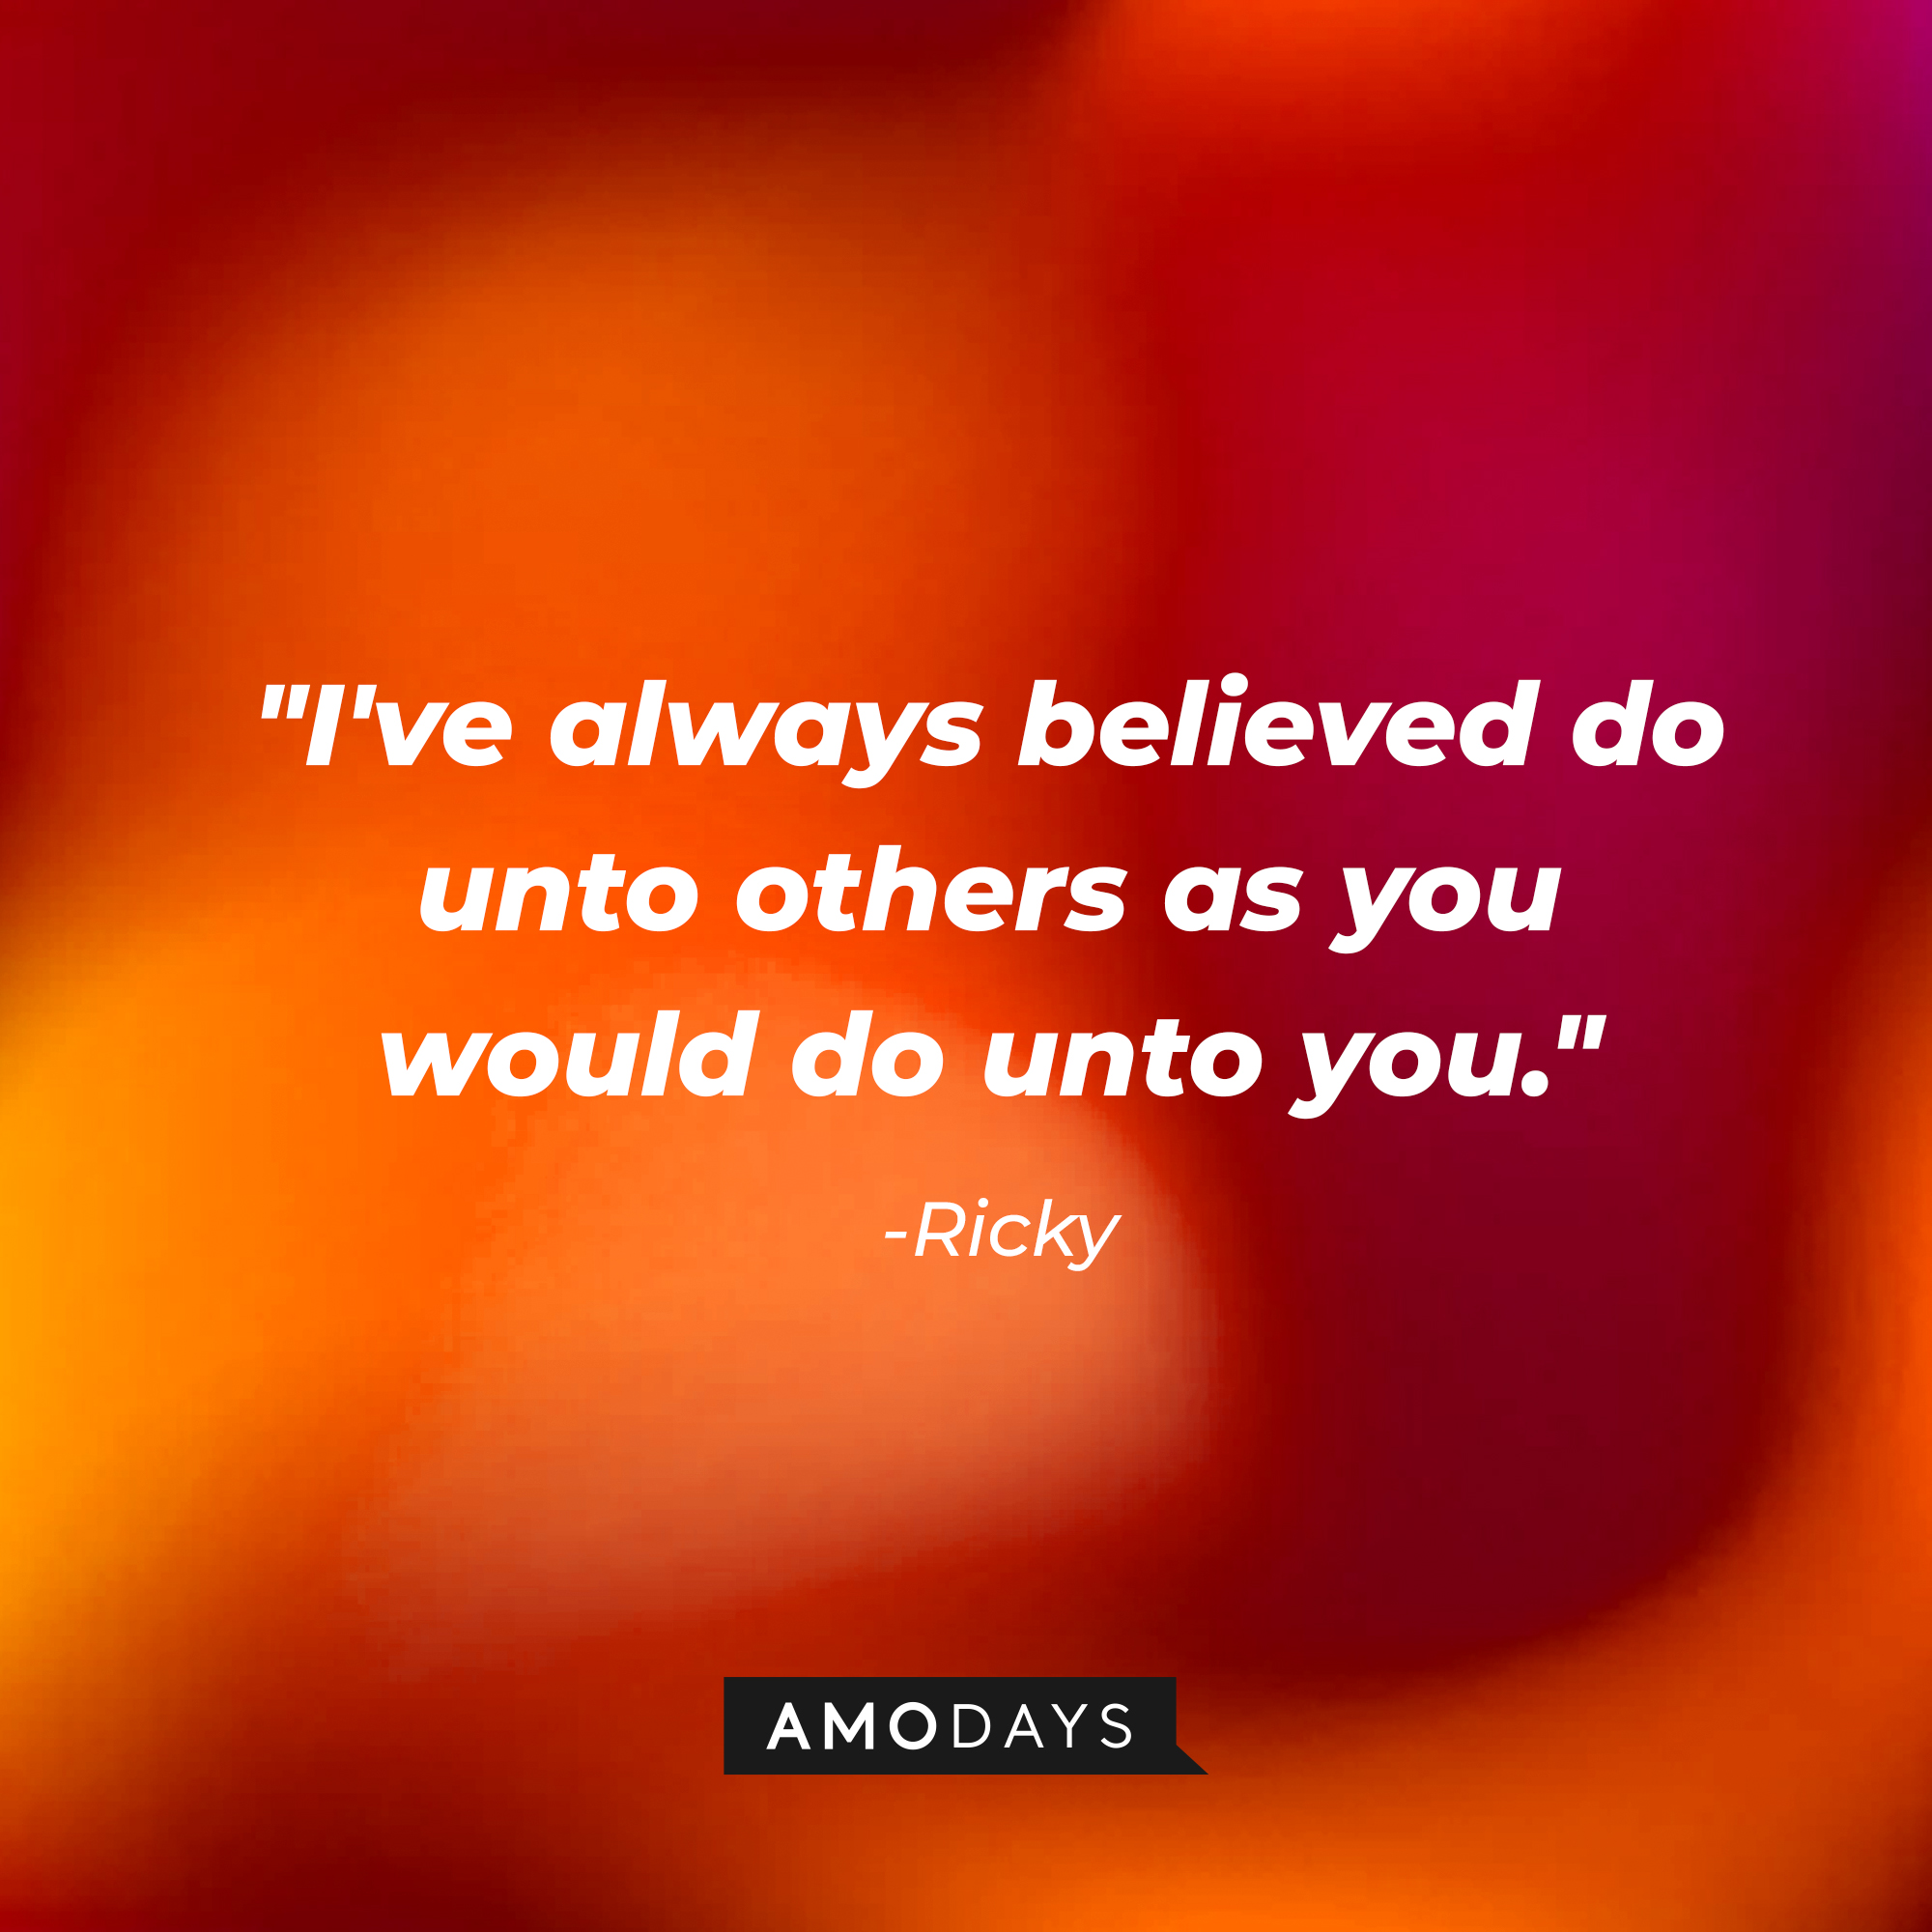 Ricky's quote, "I've always believed do unto others as you would do unto you." | Source: AmoDays